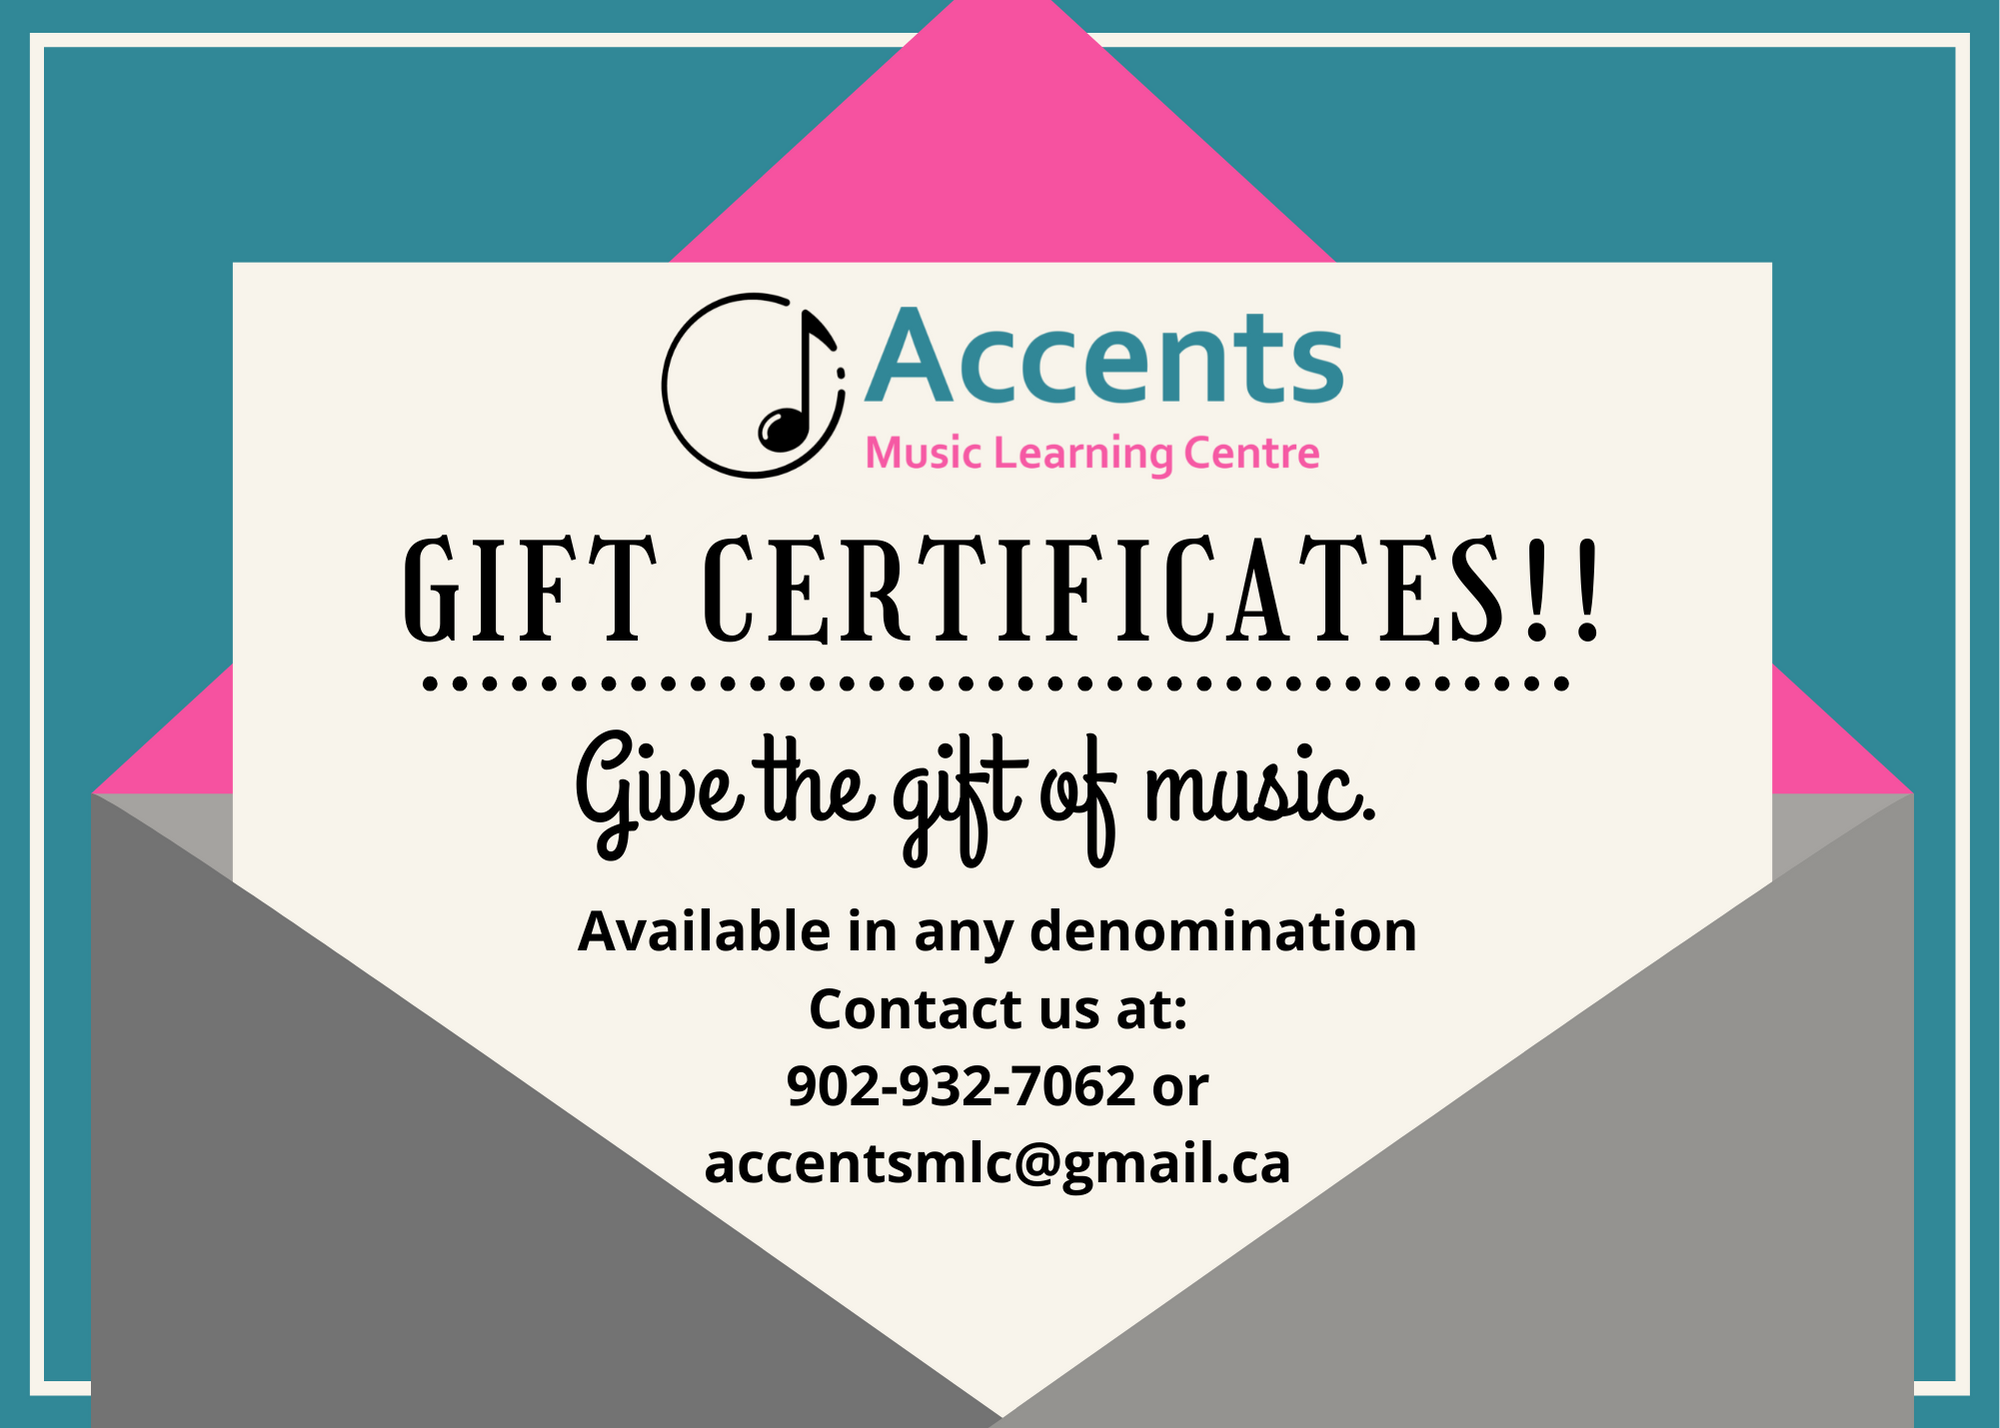 music lesson gift certificate Accents music learning centre